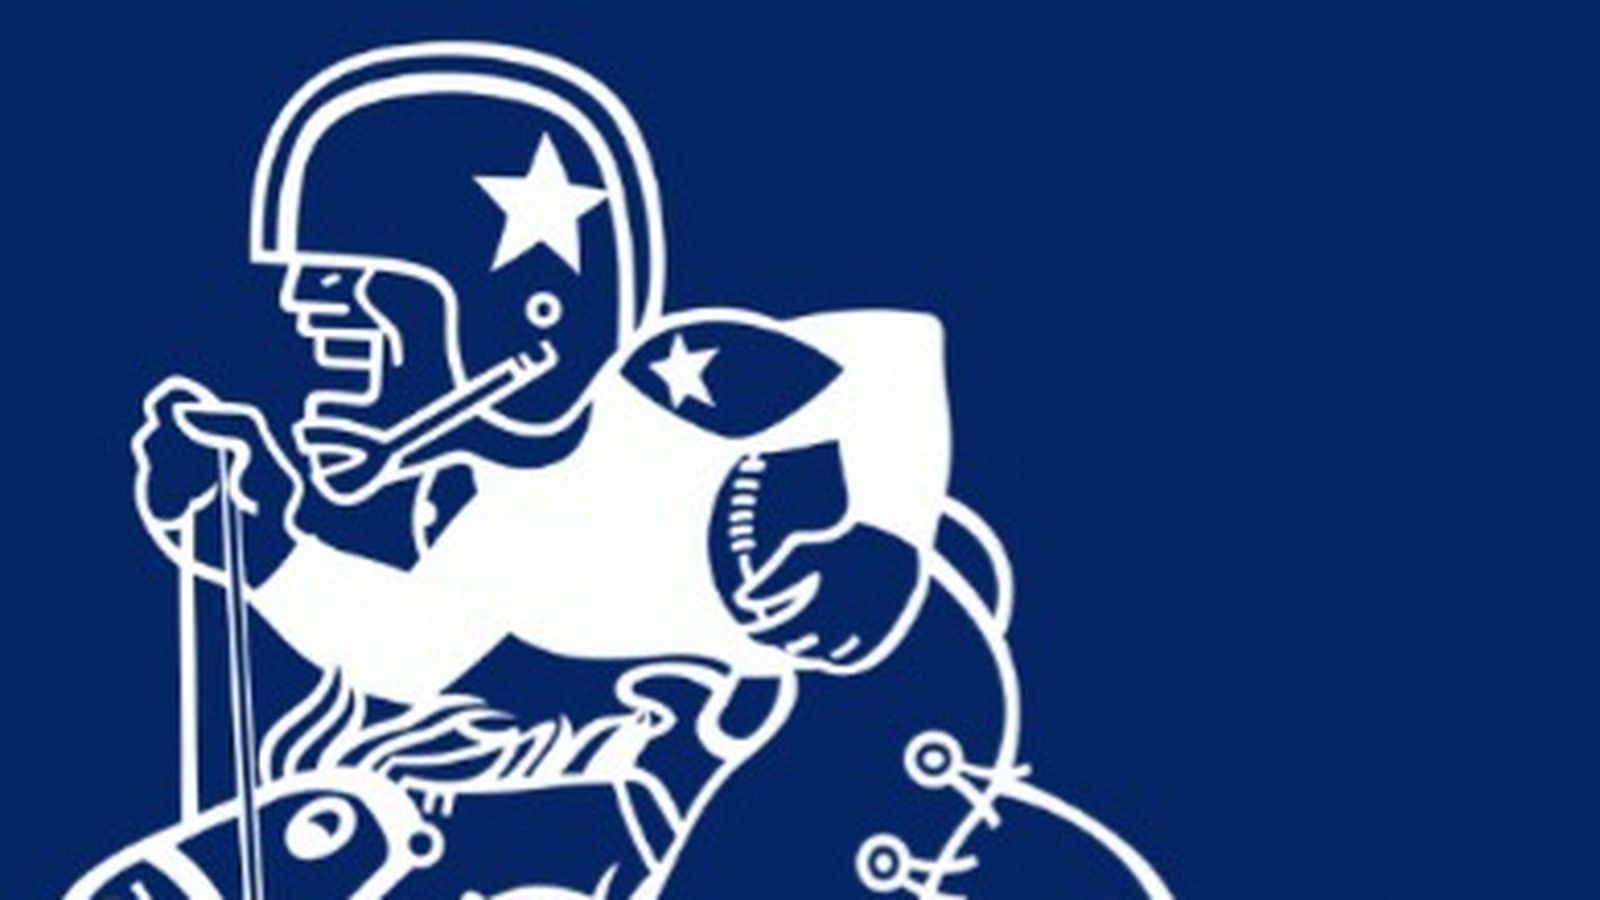 Cowboys Wallpaper For Your iPhone Ging The Boys